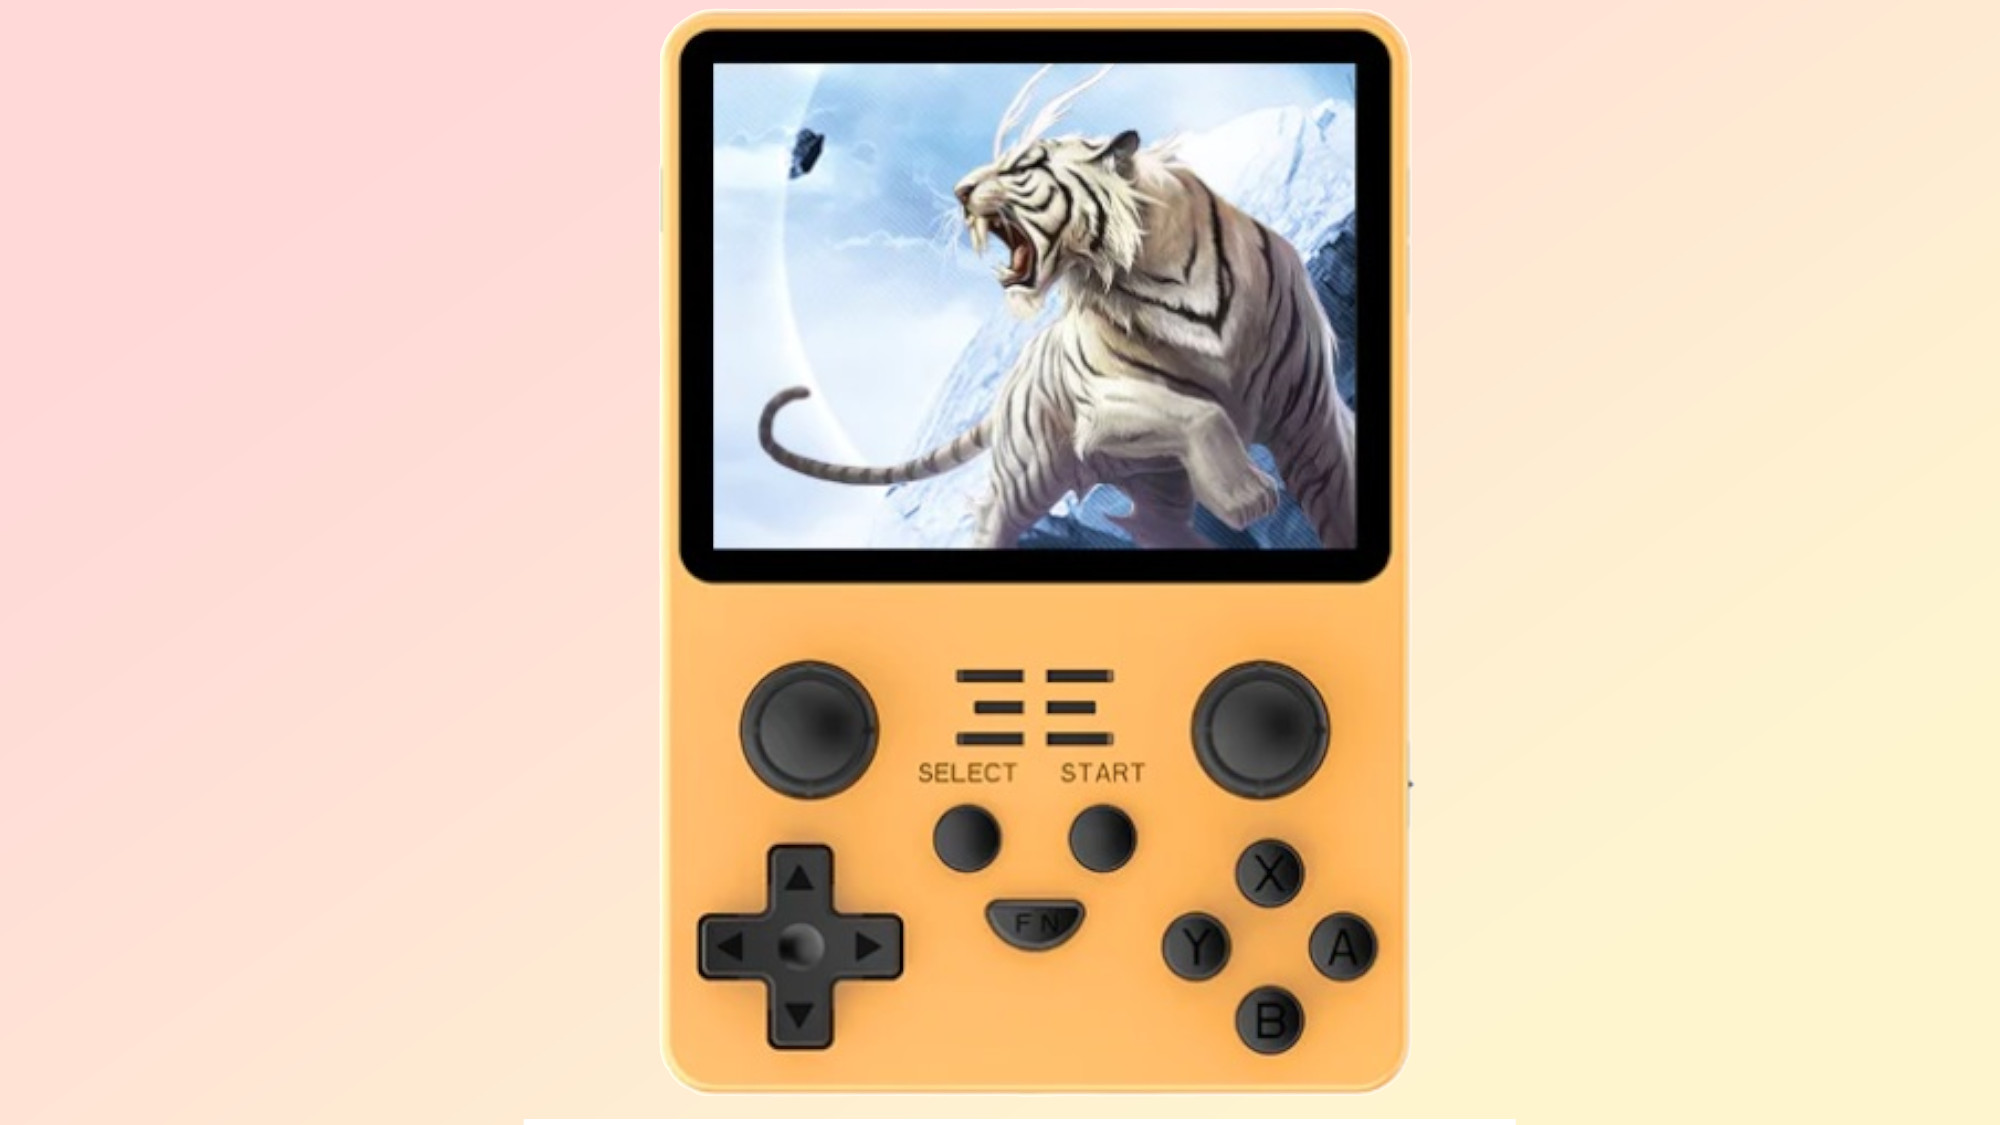 Tiger's single-game handheld consoles are coming back, for some